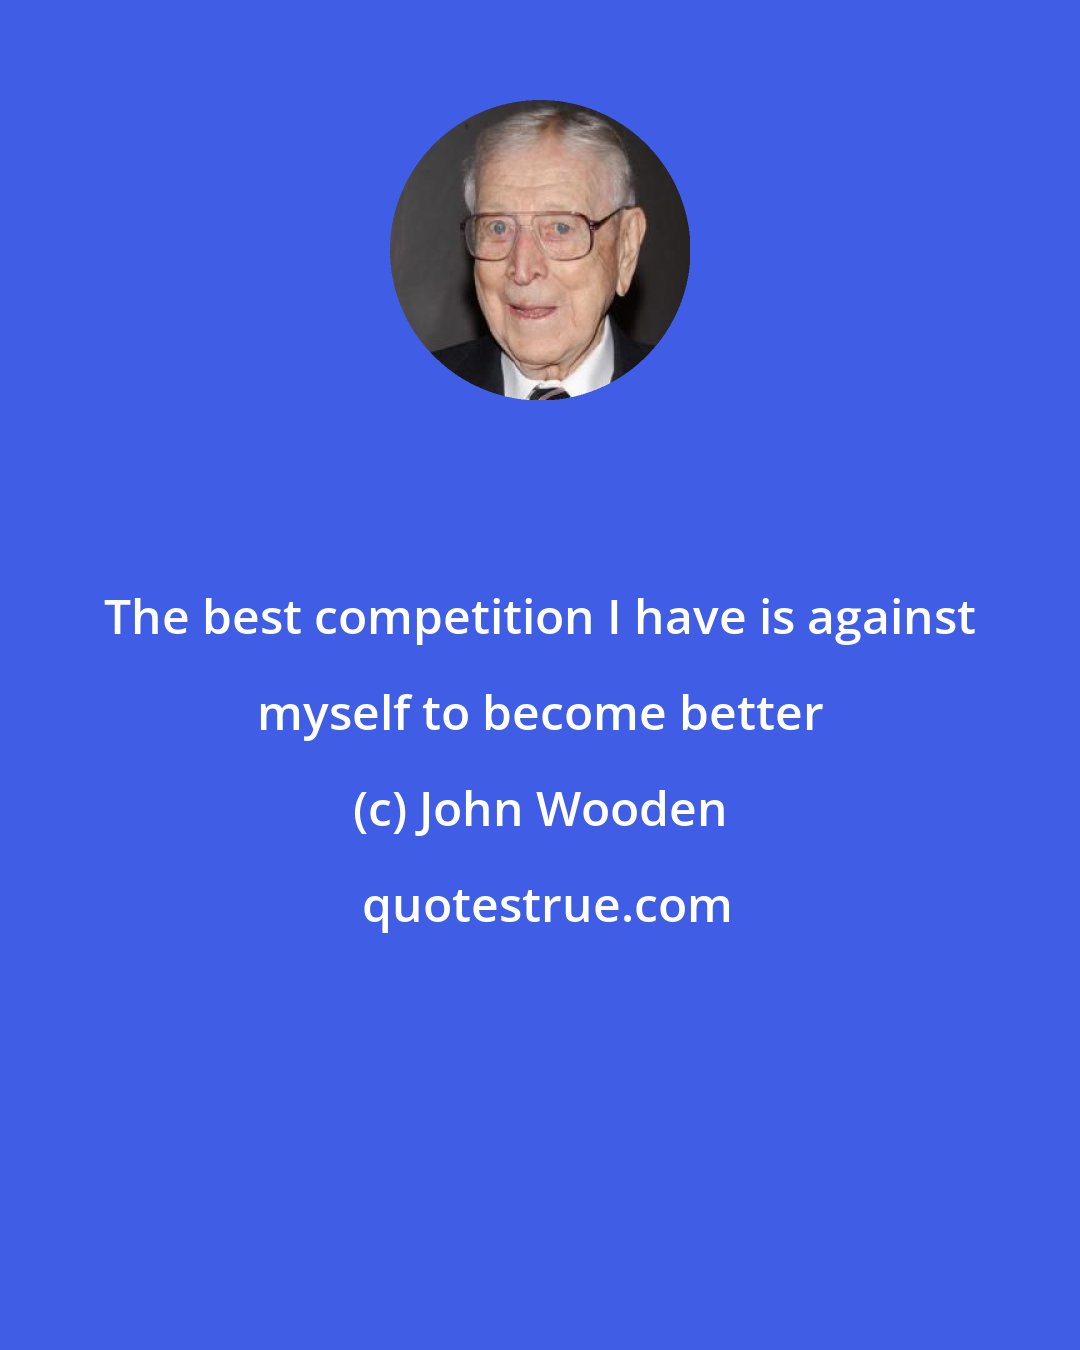 John Wooden: The best competition I have is against myself to become better